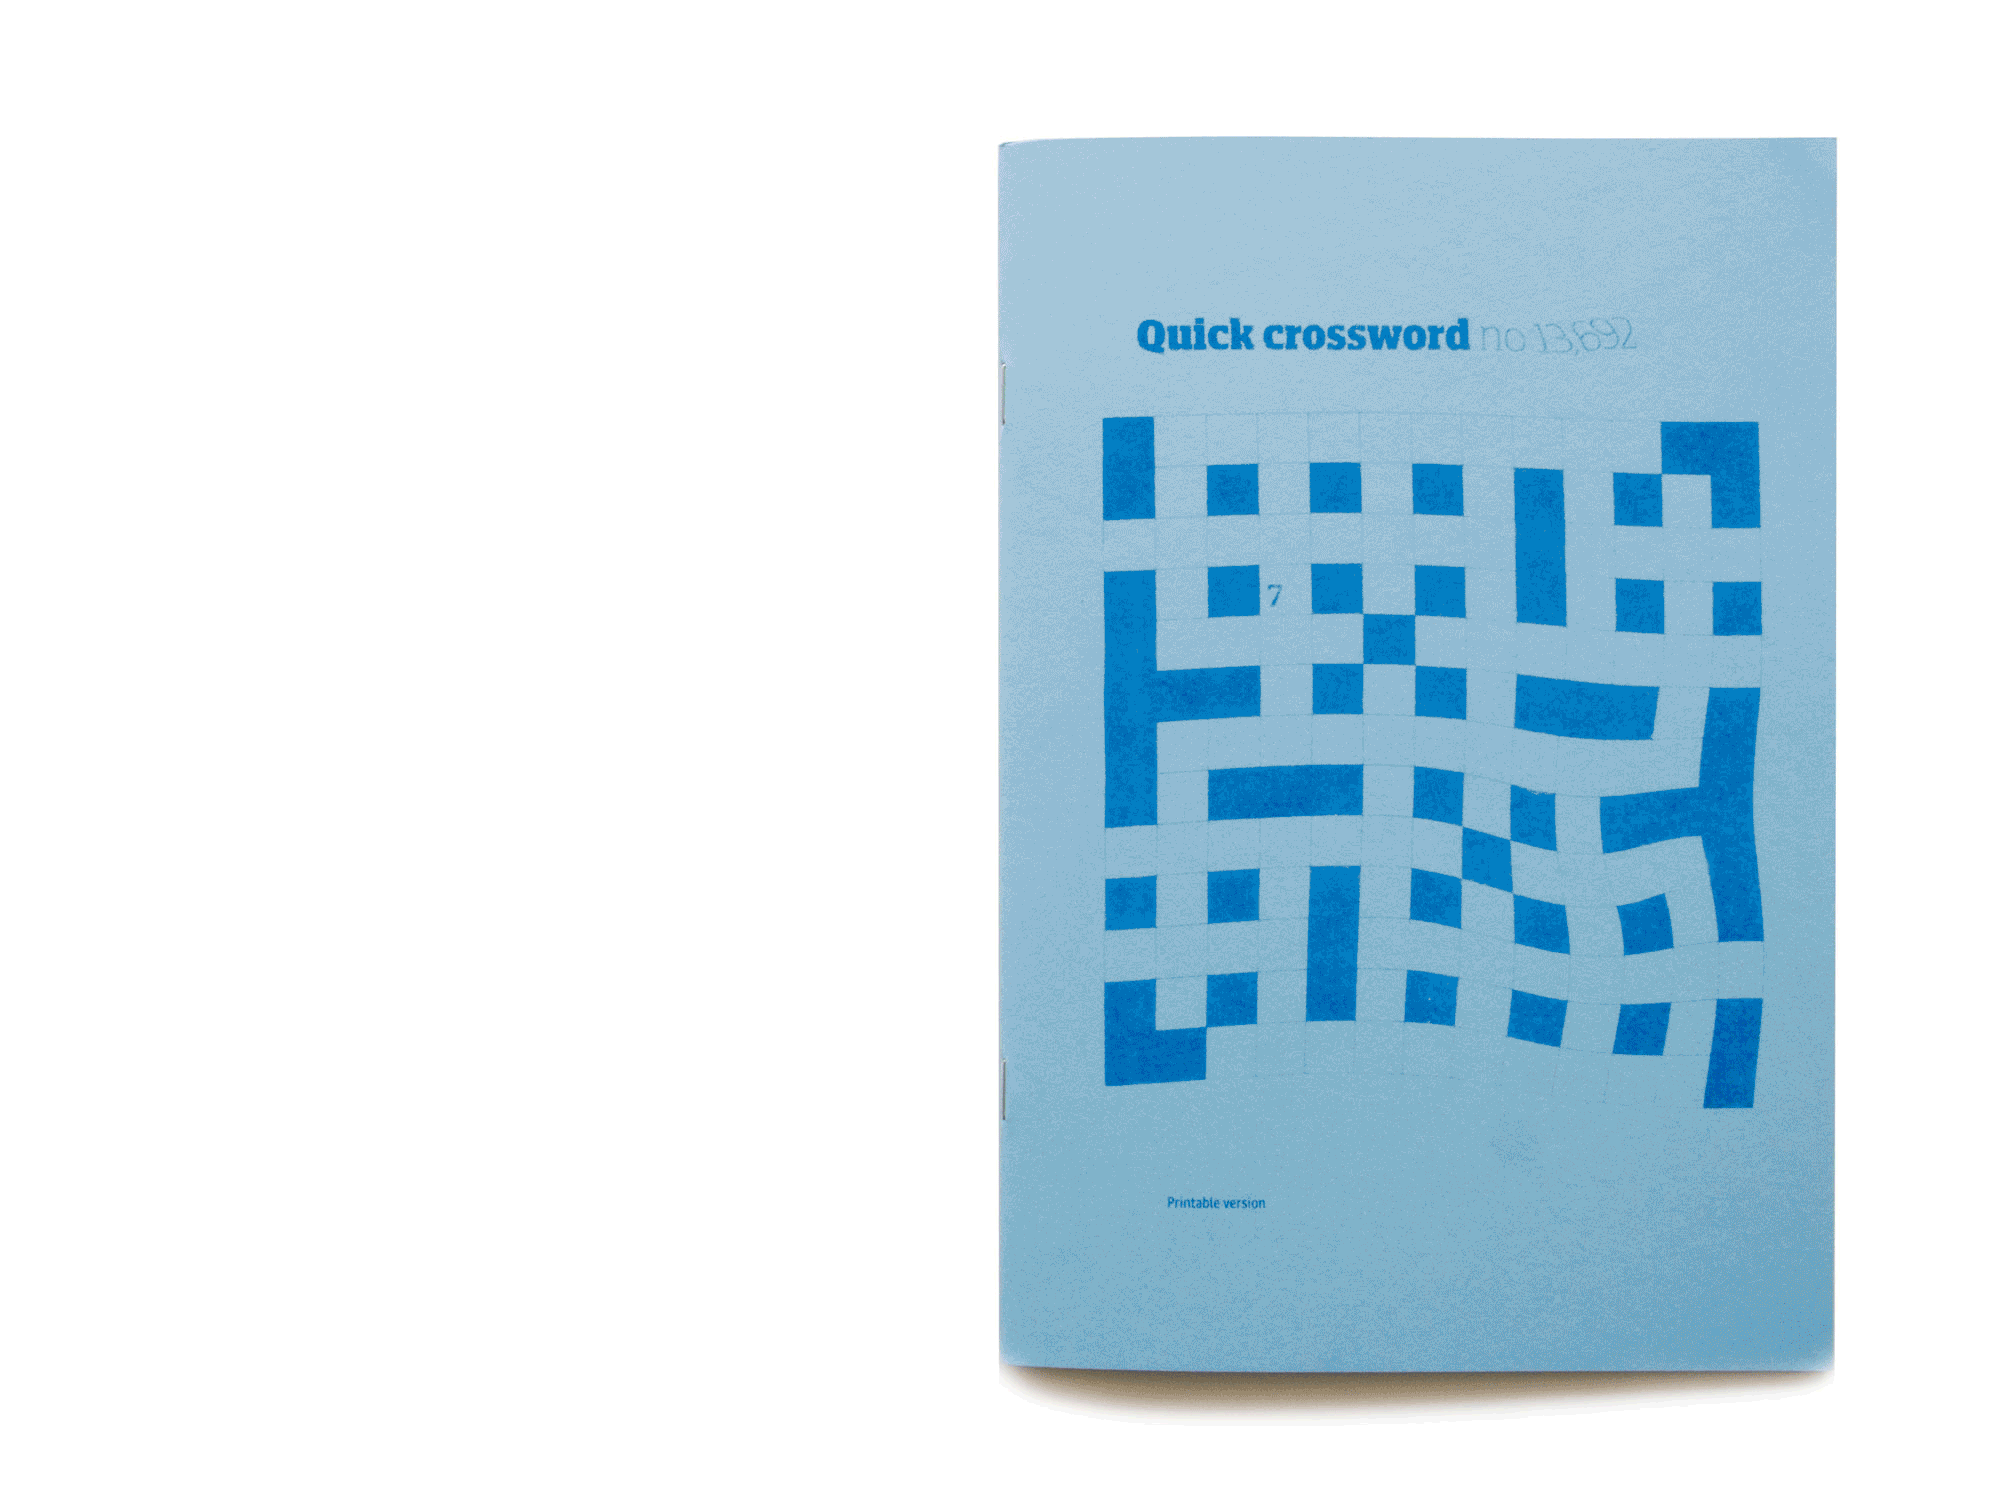 Printed at Calipso Press, Cali, Colombia.

The images of the Quick crossword Nº13.692 Vº1 are used to find images on the google's reverse image search engine. Published by Calipso Press. Edition of 185 copies